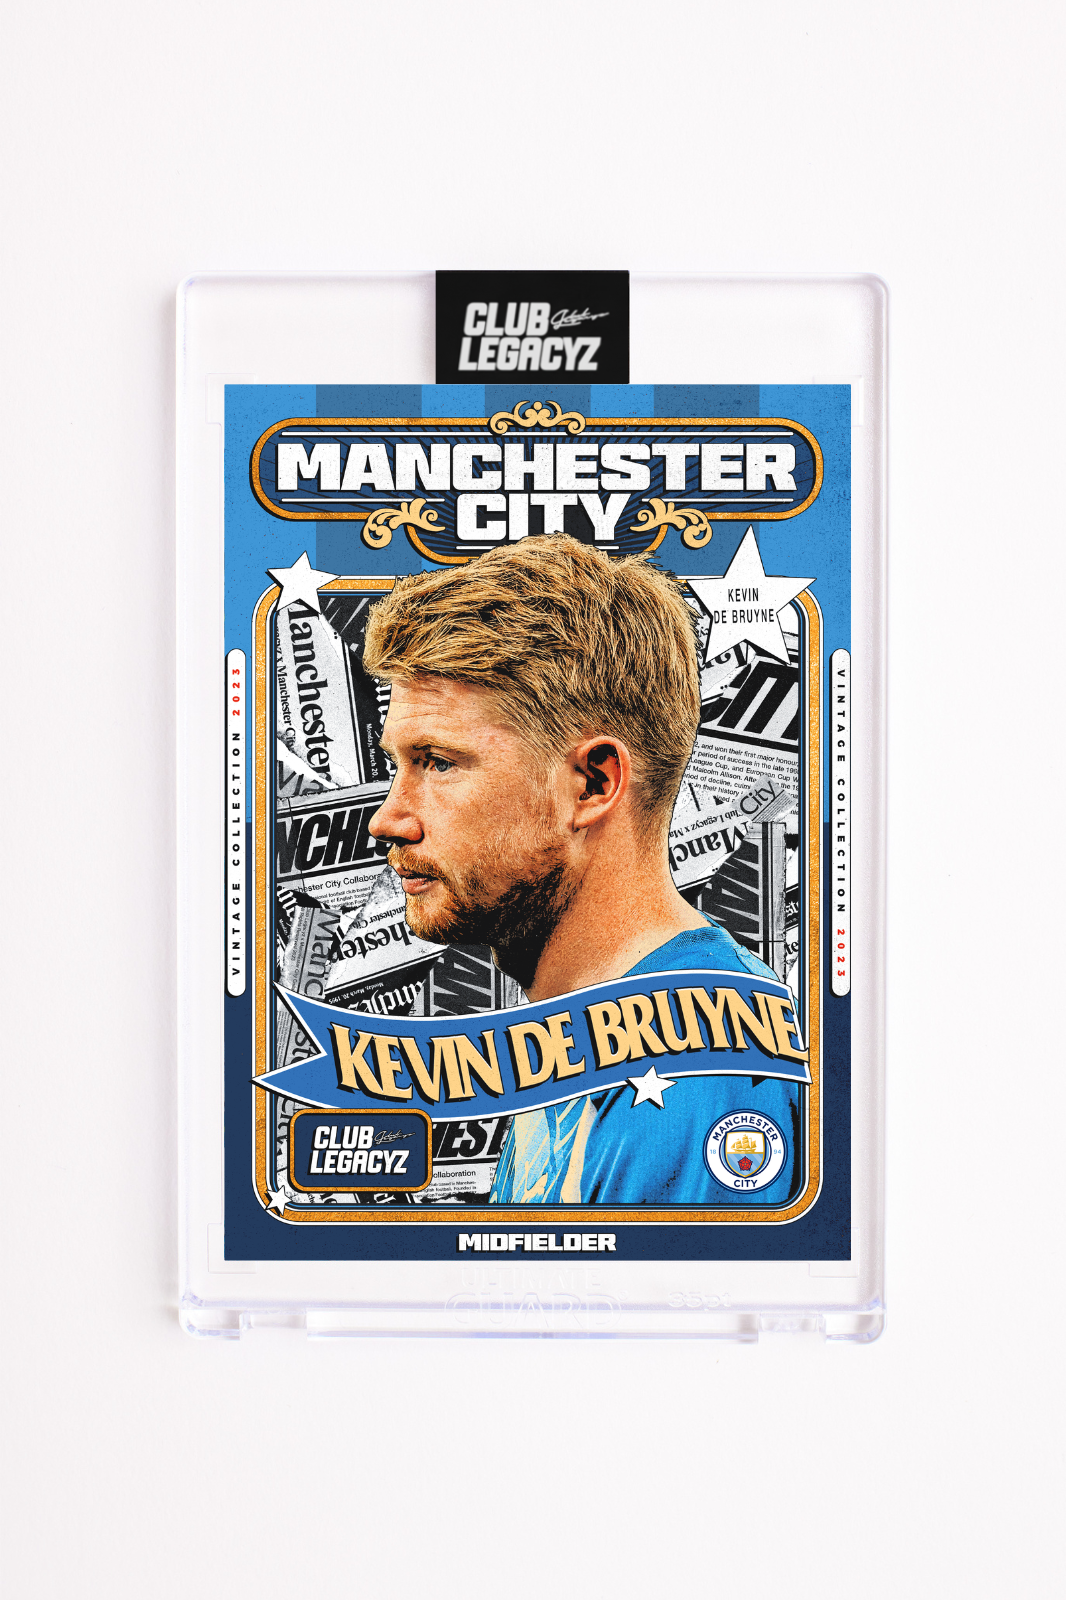 Manchester City - Kevin de Bruyne Retro Icon limited to 100